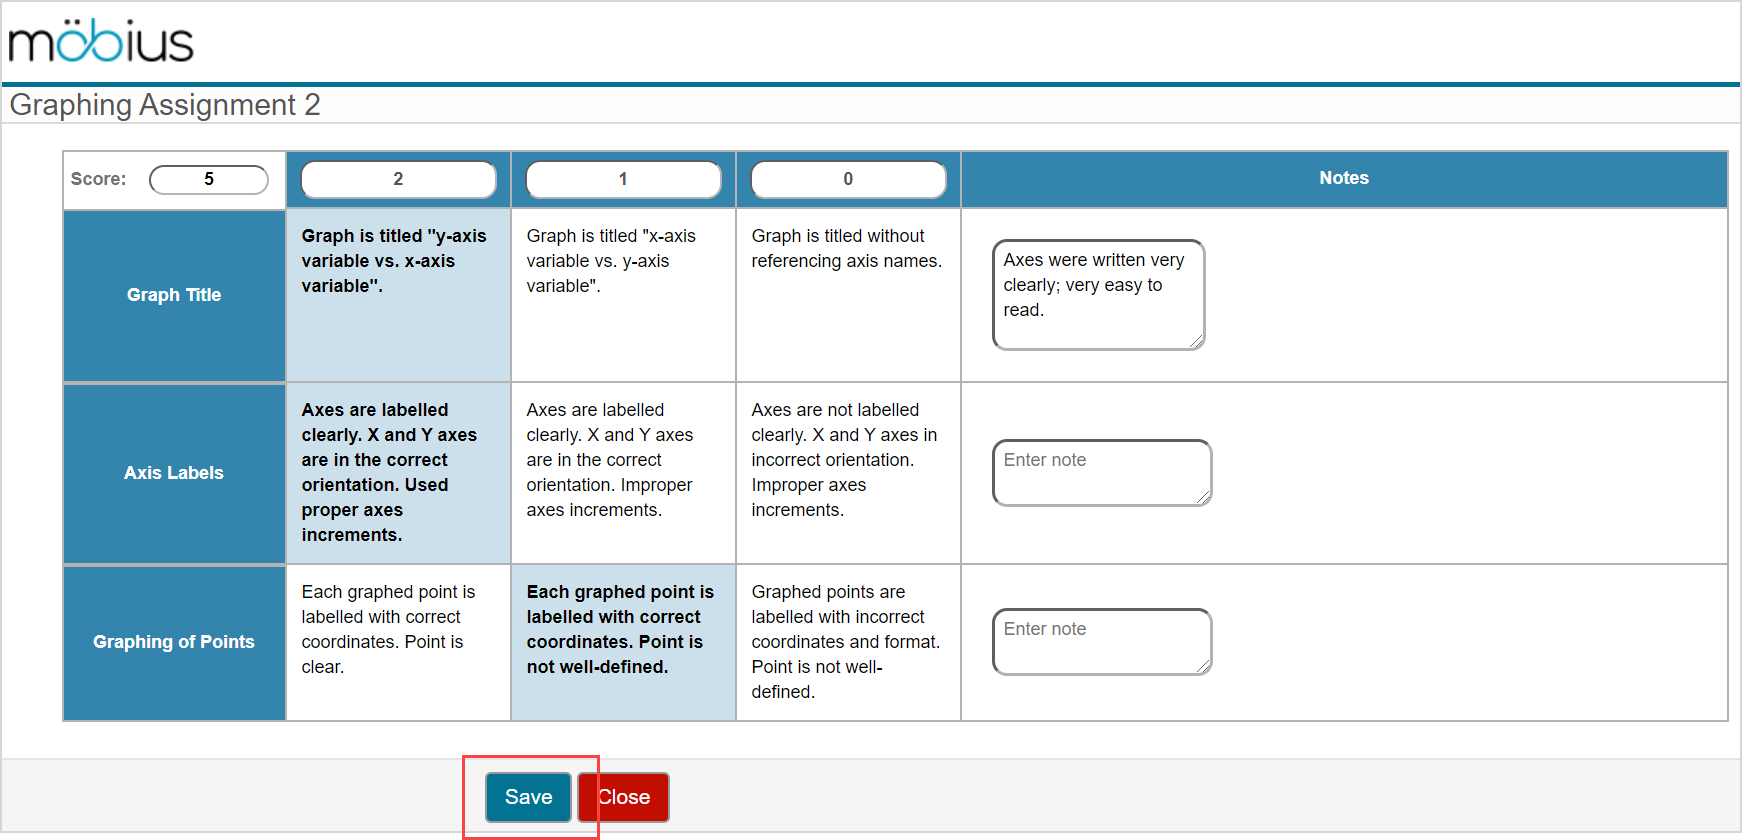 The save button is below the rubric table.